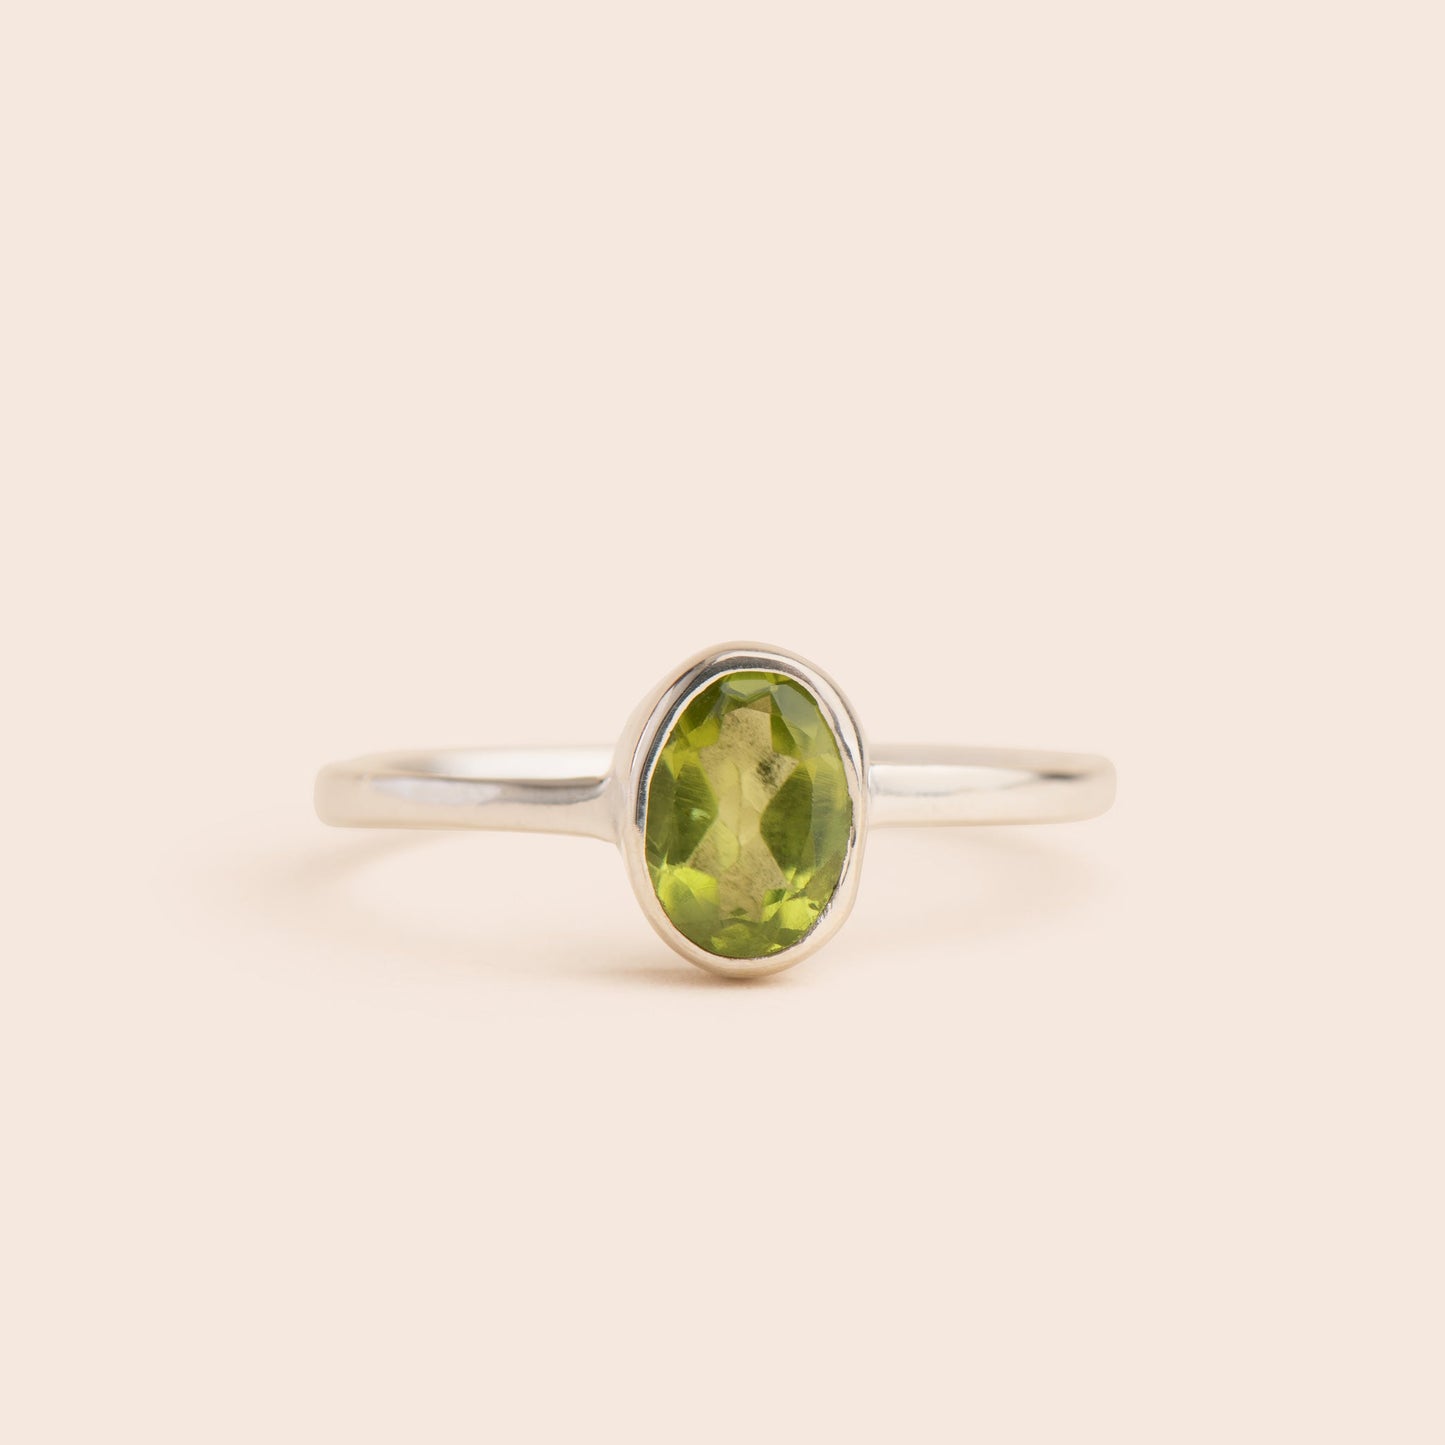 Load image into Gallery viewer, Peridot Oval Sterling Silver Ring - Gemlet
